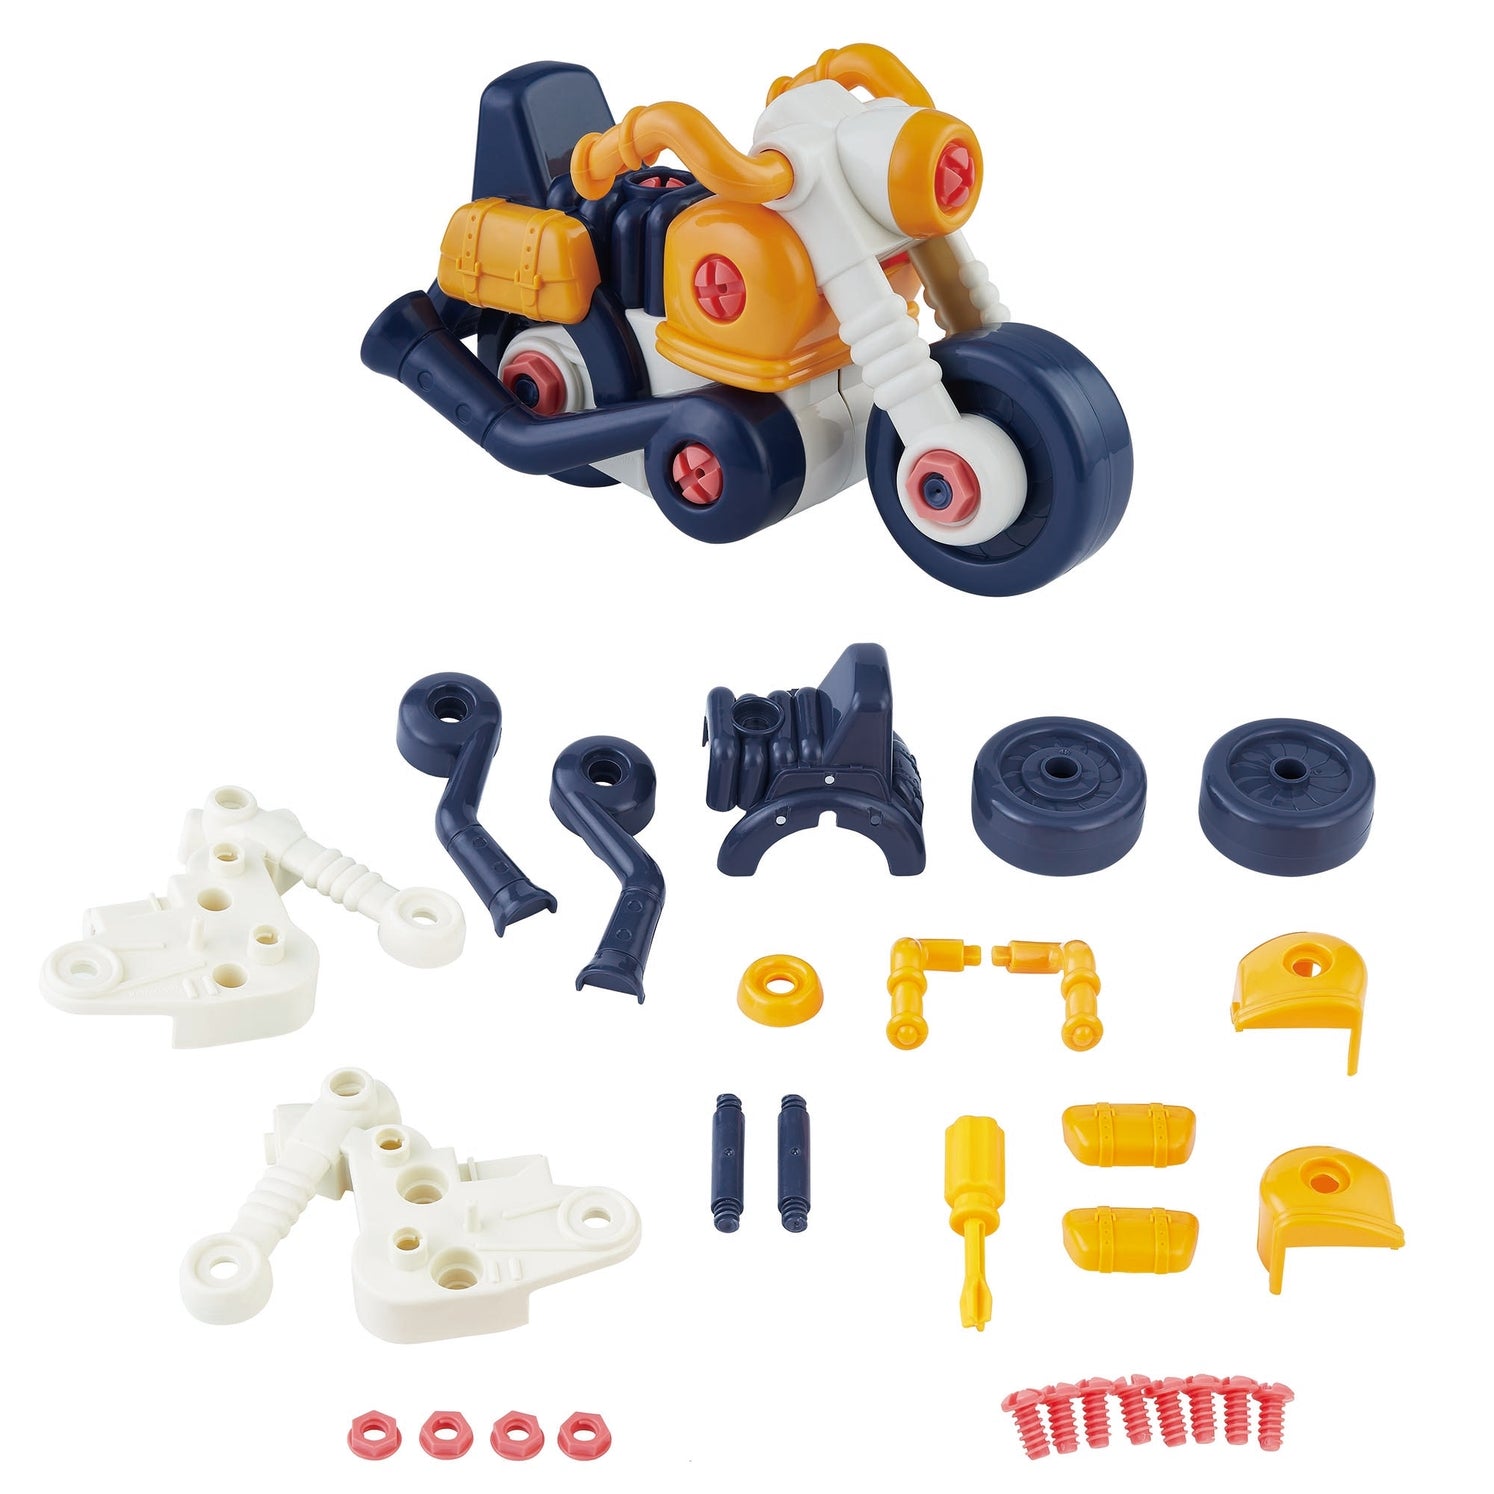 Build Your Own Vehicle Set - Twinkle Twinkle Little One